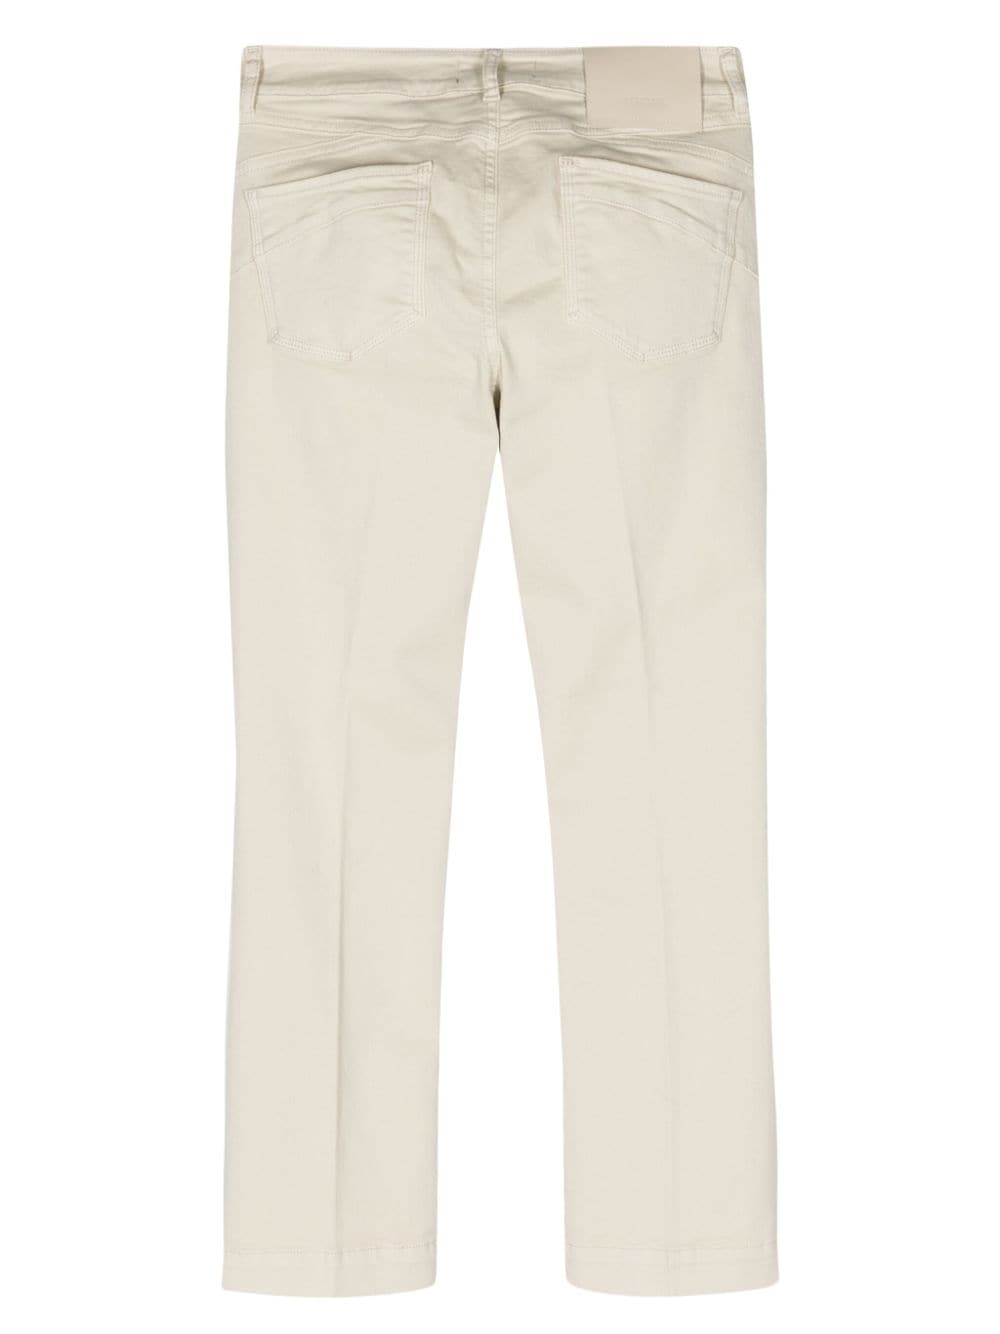 Sportmax Nilly mid waist cropped jeans - Beige